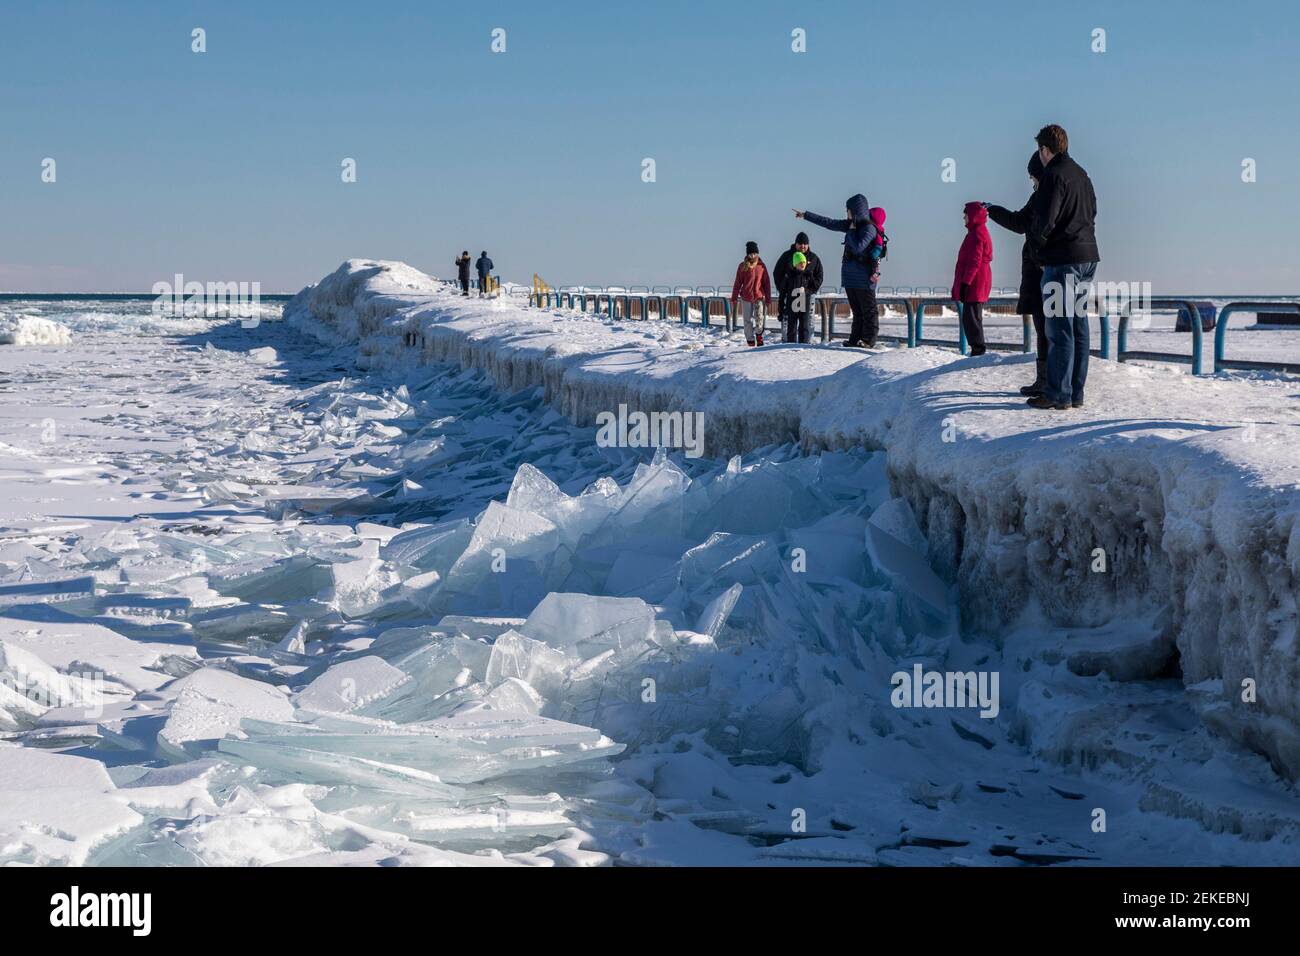 Port Sanilac, Michigan - People view ice on Lake Huron from the breakwater around the Port Sanilac Harbor. Stock Photo